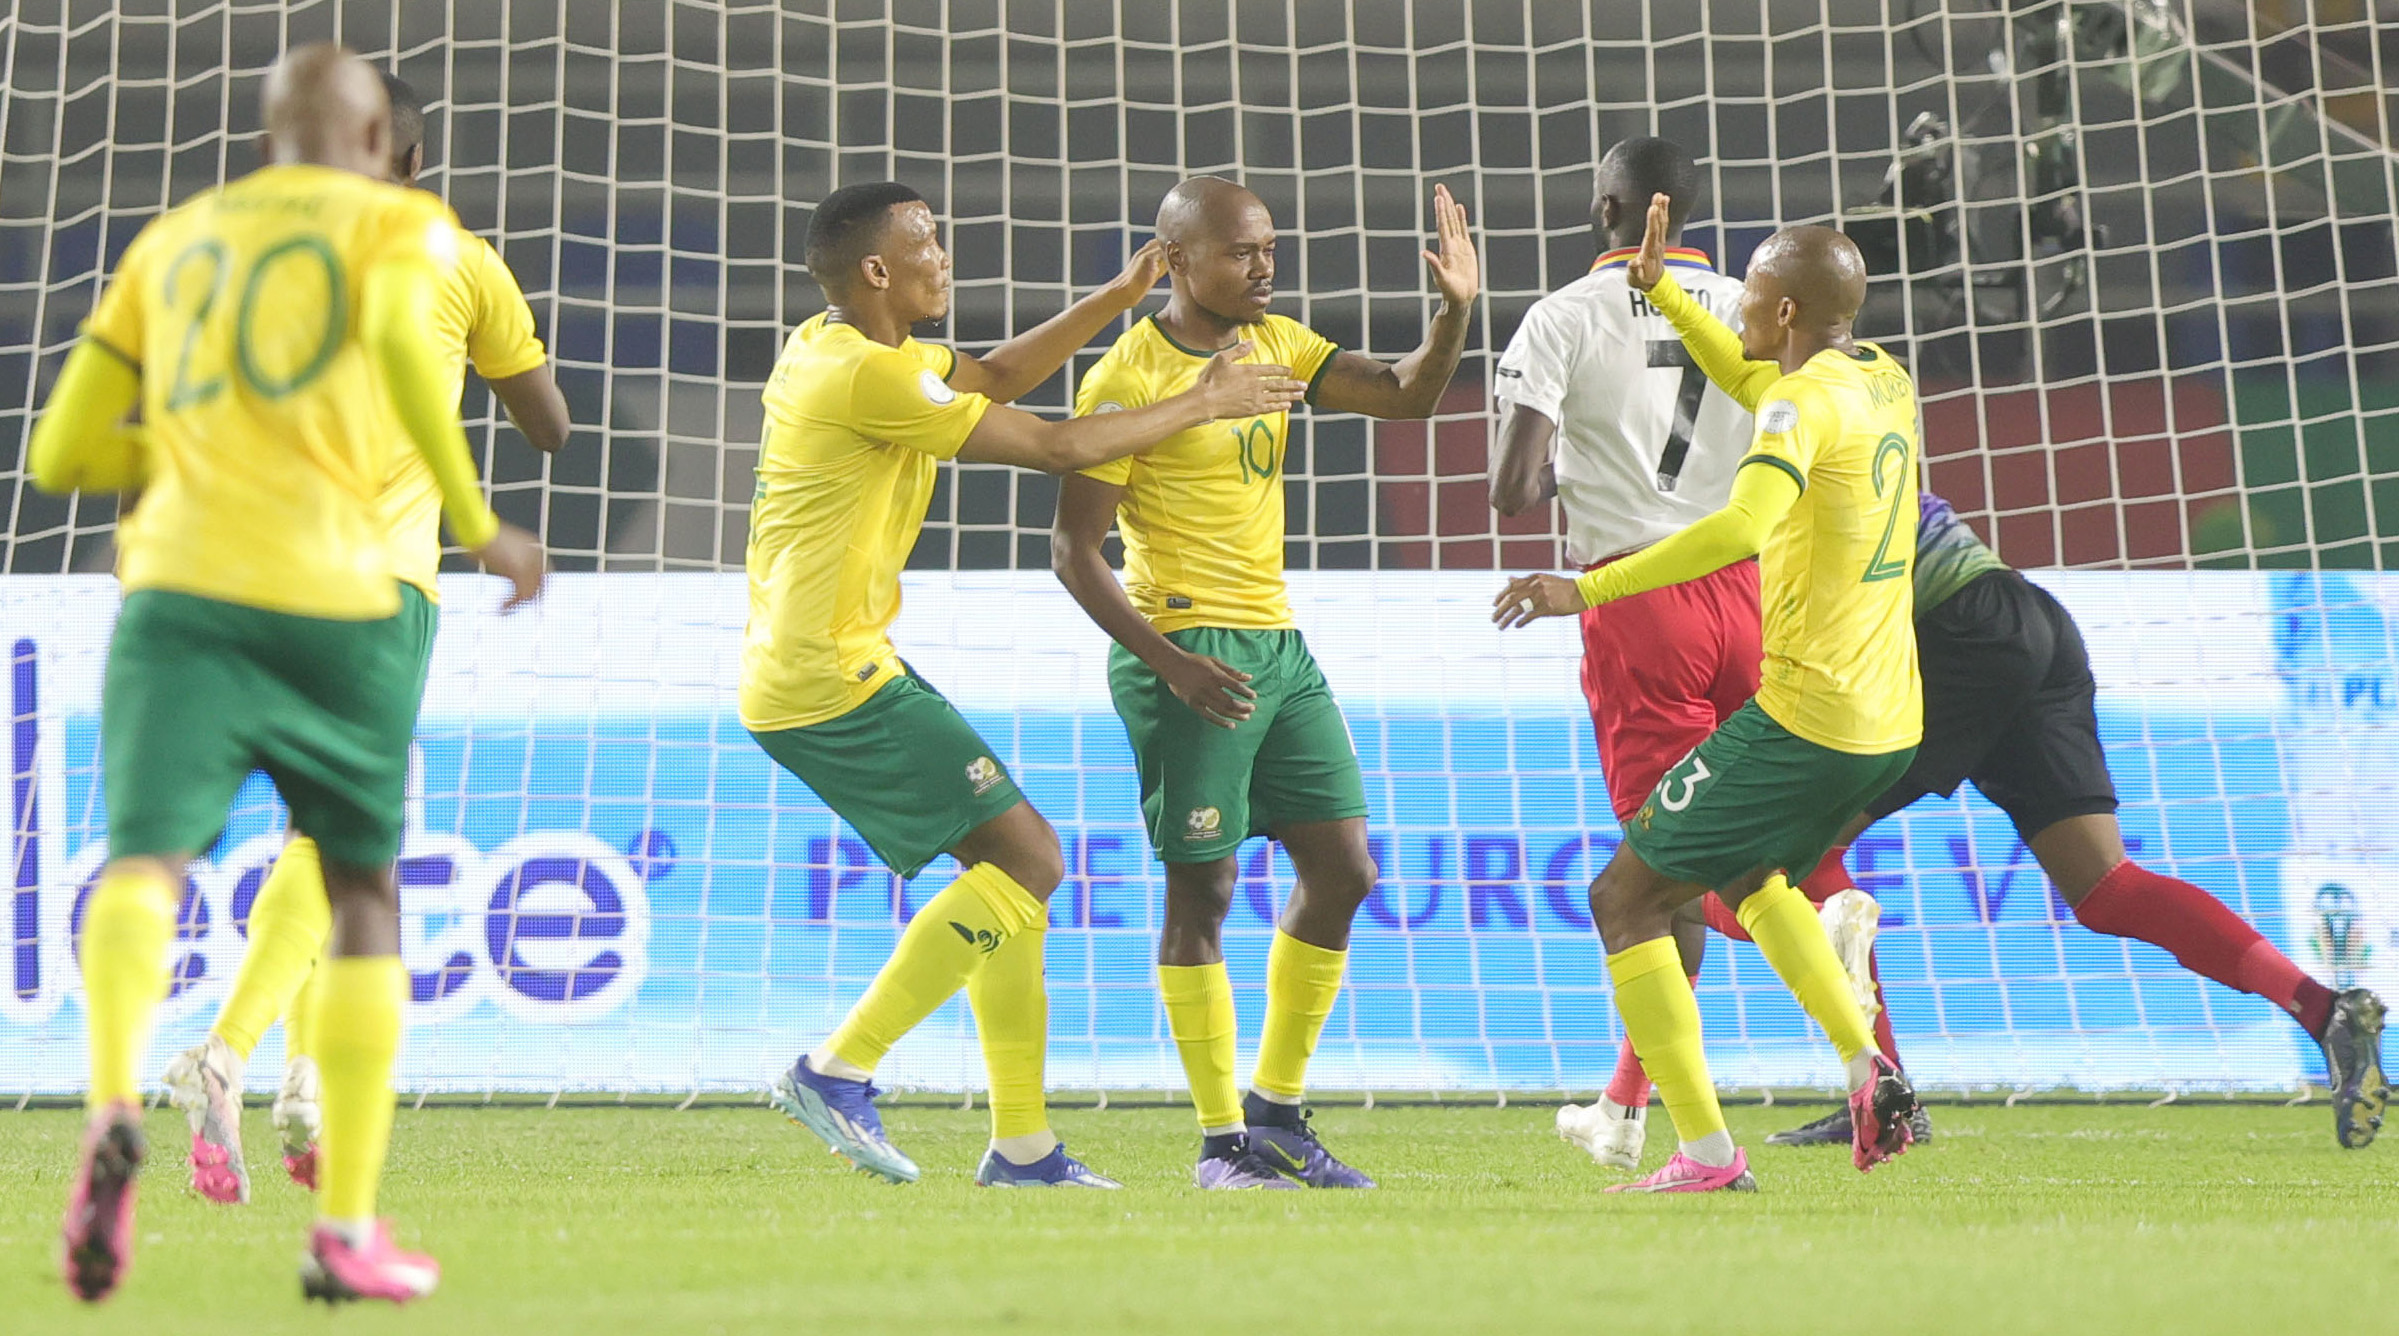 bafana bafana rout namibia, but not out of the woods yet